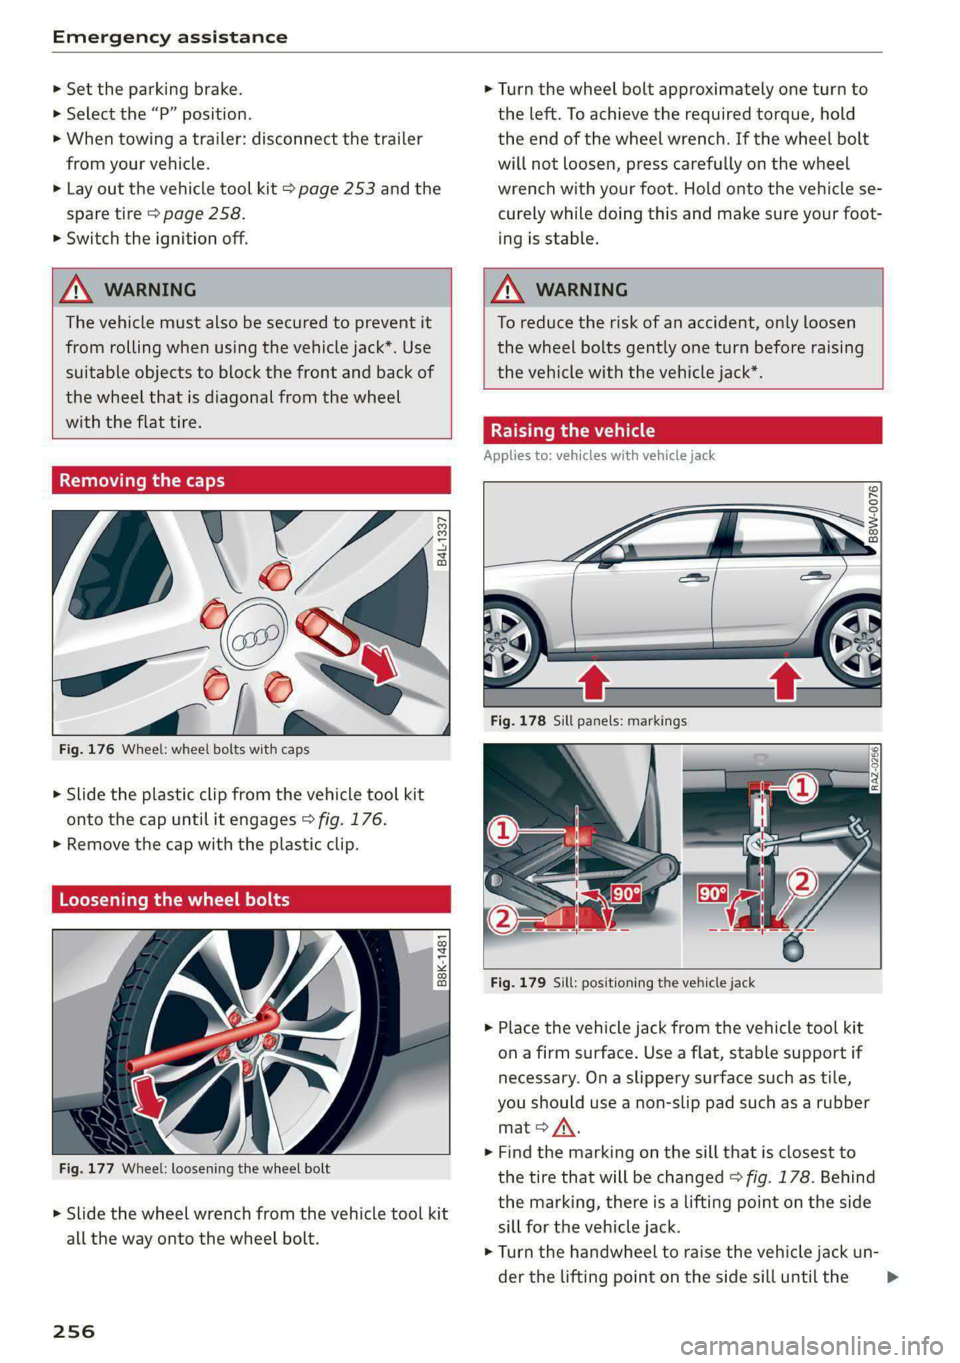 AUDI S4 2020  Owners Manual Emergency assistance 
  
> Set  the parking brake. 
> Select the “P” position. 
>» When towing a trailer: disconnect the trailer 
from your vehicle. 
> Lay out the vehicle tool kit > page 253 and